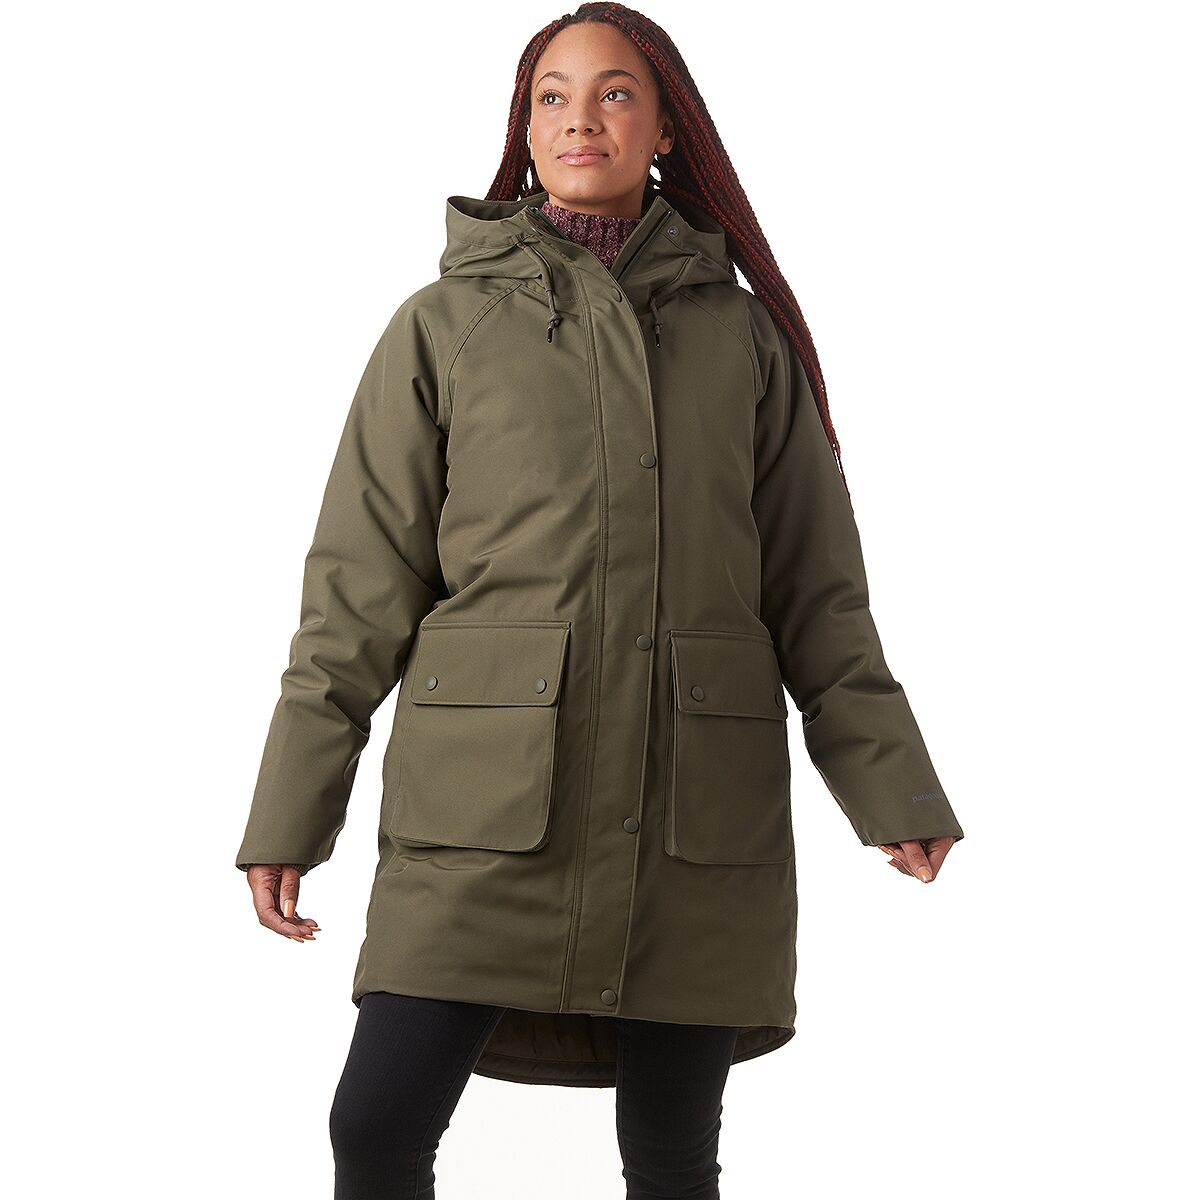 Patagonia Great Falls Insulated Parka - Women's - Women